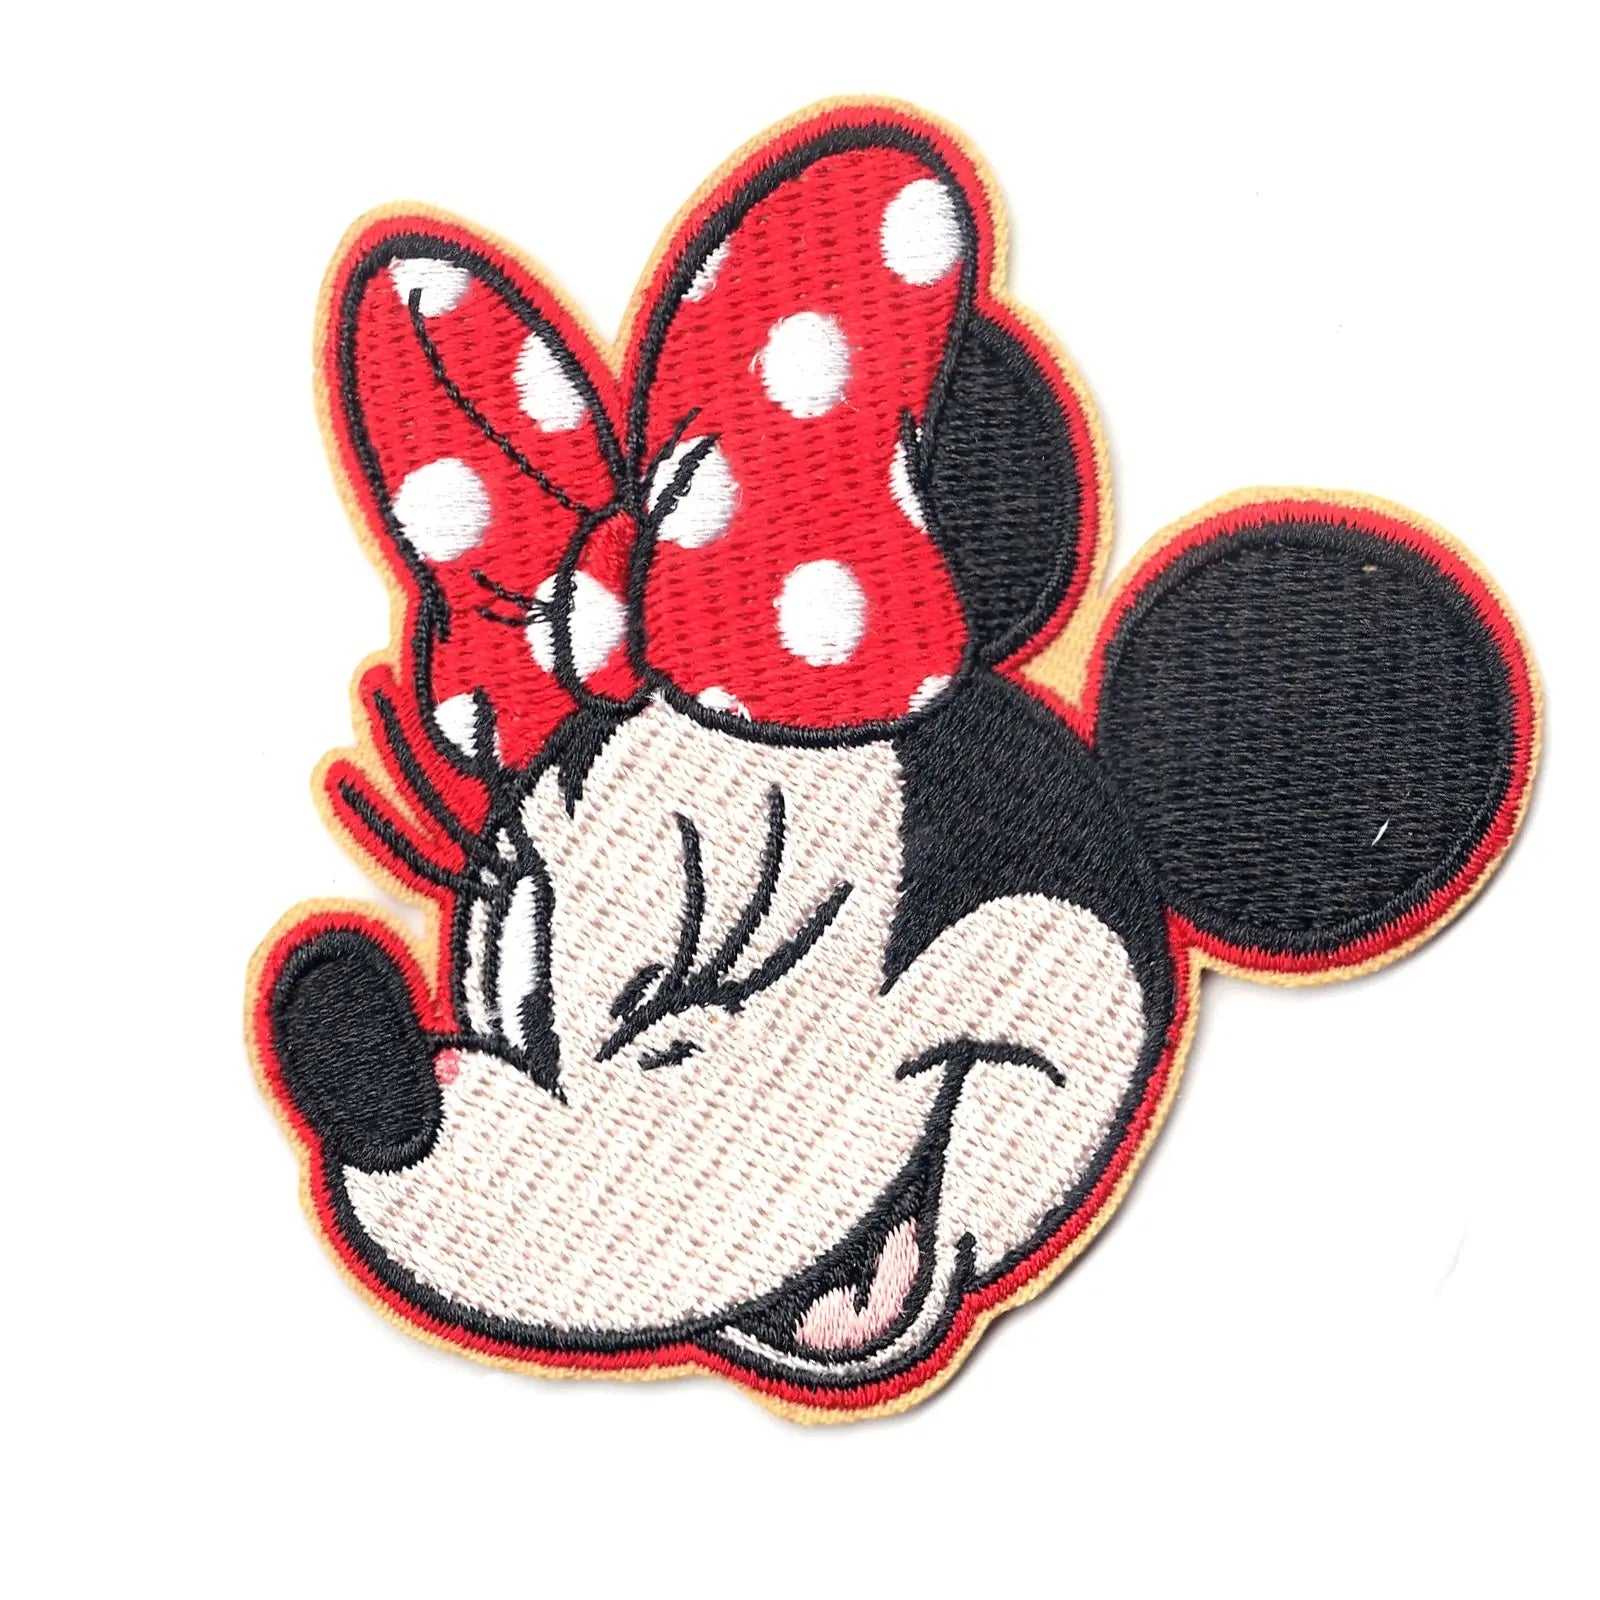 Cartoon Mouse Embroidery Patch  Minnie Mouse Embroidery Patch